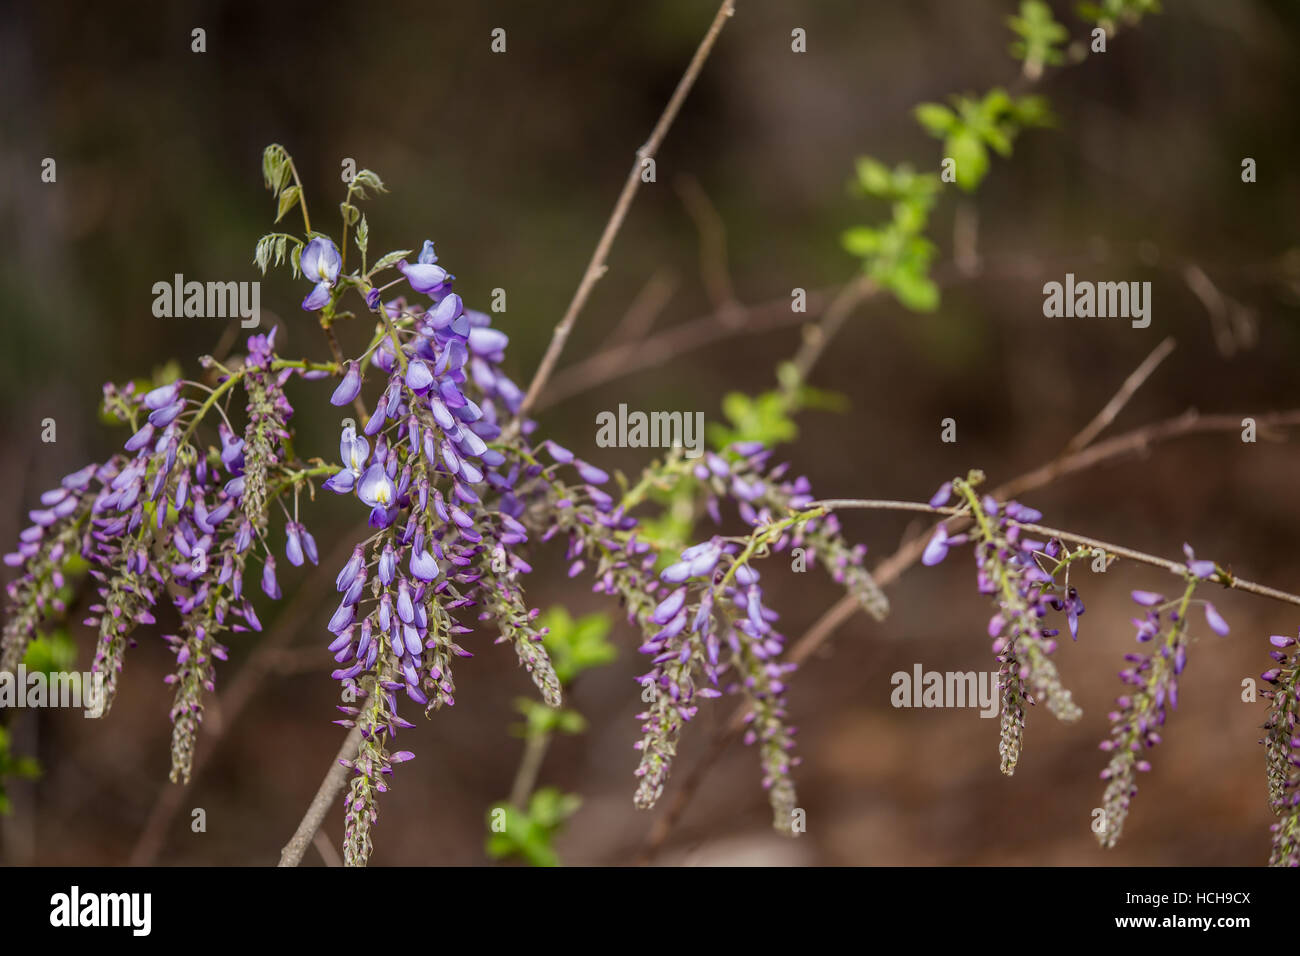 Wisteria vine with partially opened flower clusters Stock Photo